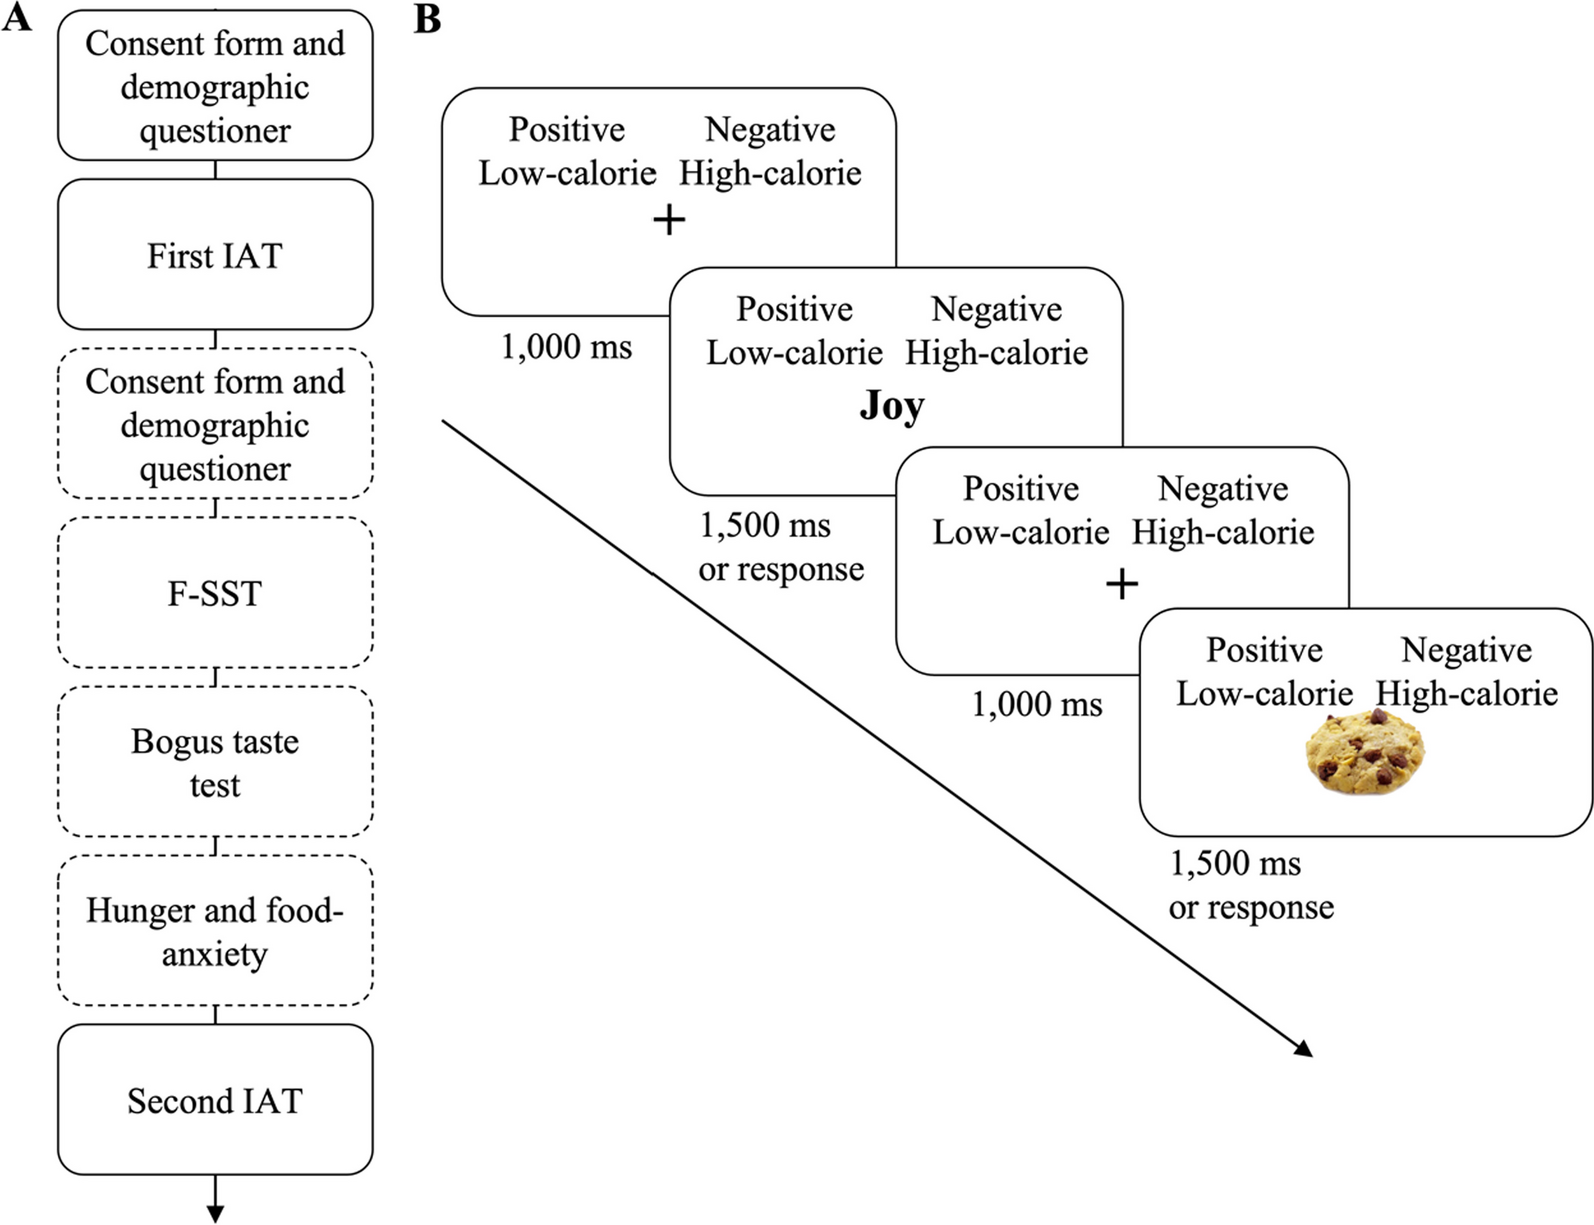 Fostering positive attitudes toward food in individuals with restrained eating: the impact of flexible food-related inhibition